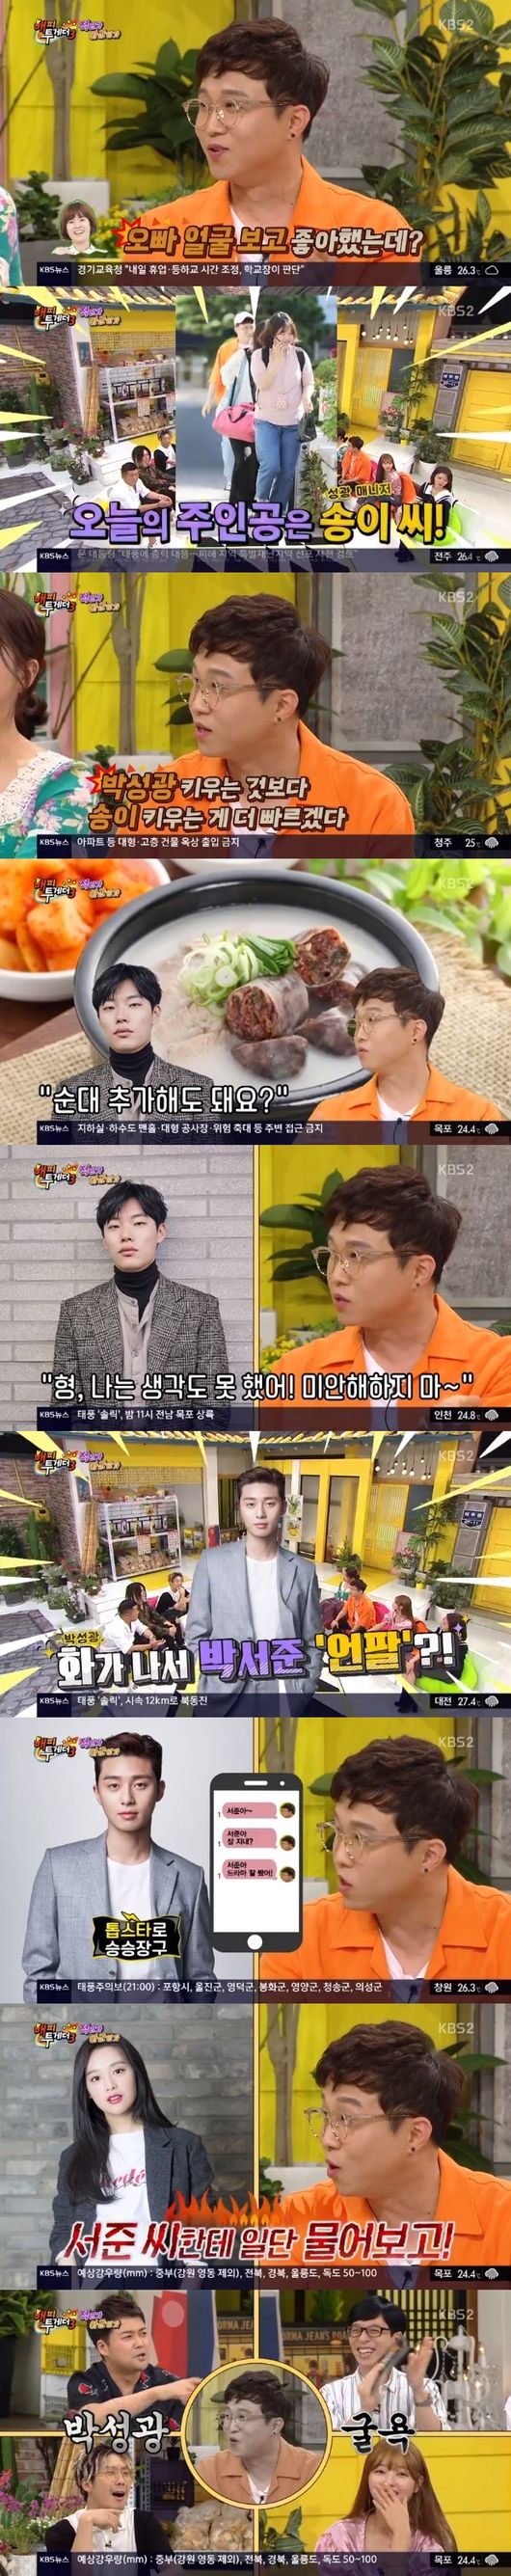 Park Sung-Kwang, who was in his second heyday, showed off his talent in Hattoo 3.On KBS2 Happy Together 3 broadcasted on the afternoon of the 23rd, Hae-tong: Enemy and Friendly Special starring Legangpyeong Skull & Haha, Park Sung-Kwang, Kang Yumi and Ohmaigol Young-a and Legendary Jo-dong: Special Feature with Summer MT-Talk God were featured in the first part.Park Sung-Kwang, who has recently become popular through the Point of Potential Intervention, mentioned the manager Song Yi Yang, who became more famous than himself.Park Sung-Kwang said, There is a story that it is faster to raise manager Songi than to raise Park Sung-Kwang.Park Sung-Kwang, who said that he had contacted his fellow Park Ji-sun after the broadcast of Power of omniscient meddling, said, Park Ji-sun said that there are many stories about how people were excited about broadcasting ,So I asked him, Did you like me? And he said, I liked my face.Jeon Hyun-moo said, It feels like Song Jung-ki now. He laughed at Park Sung-Kwangs confidence.Park Sung-Kwang also released an episode with actors Ryu Jun-yeol and Park Seo-joon.On Ryu Jun-yeol, he said: Ive been close since I was unknown: I met the day I passed the Respond, 1988 audition, and I thought it was a supporting actor.I ate at the Sundae soup house in celebration, and Ryu Jun-yeol asked, Can I add a sundae? I said, Stop eating, but it was a joke. Park Sung-Kwang said, After Reply 1988 was a hit, I was trying to tell you that it was a joke.I laughed and laughed, but I kept worrying. Since then, Ryu Jun-yeol and Park Sung-Kwang have appeared together in the drama Untouch Romance, and eventually they talked about it.Park Sung-Kwang said, I went because I wanted to eat bean noodles, but there were five staff members of Ryu Jun-yeol, but Ryu Jun-yeol calculated.I hated myself. When I brought up the anecdote of Sundaeguk that day, Ryu Jun-yeol told me not to be sorry that he was not thinking.I am still very close to Ryu Jun-yeol Asked if he had been angry with Park Seo-joon, Park Sung-Kwang said, It was originally a match.Park Sung-Kwang said: I used to be close to that friend, I was in Shut Up and Family together, and it started to work out one day.And when I did not have one in Katok, I was using it only. I turned out to have changed the number. I was sad and wanted to get revenge, so I had an unarmed, and then I followed right away, he said.Park Sung-Kwang said, I met actor Kim Ji-won and asked him to give me the number of Park Seo-joon, but once he asked Park Seo-joon, he told me to tell him.Yoo Jae-seok said, It may be right in the procedure. Park Sung-Kwang said, I think I was afraid I would be a fool.Hattoo 3 broadcast screen capture.